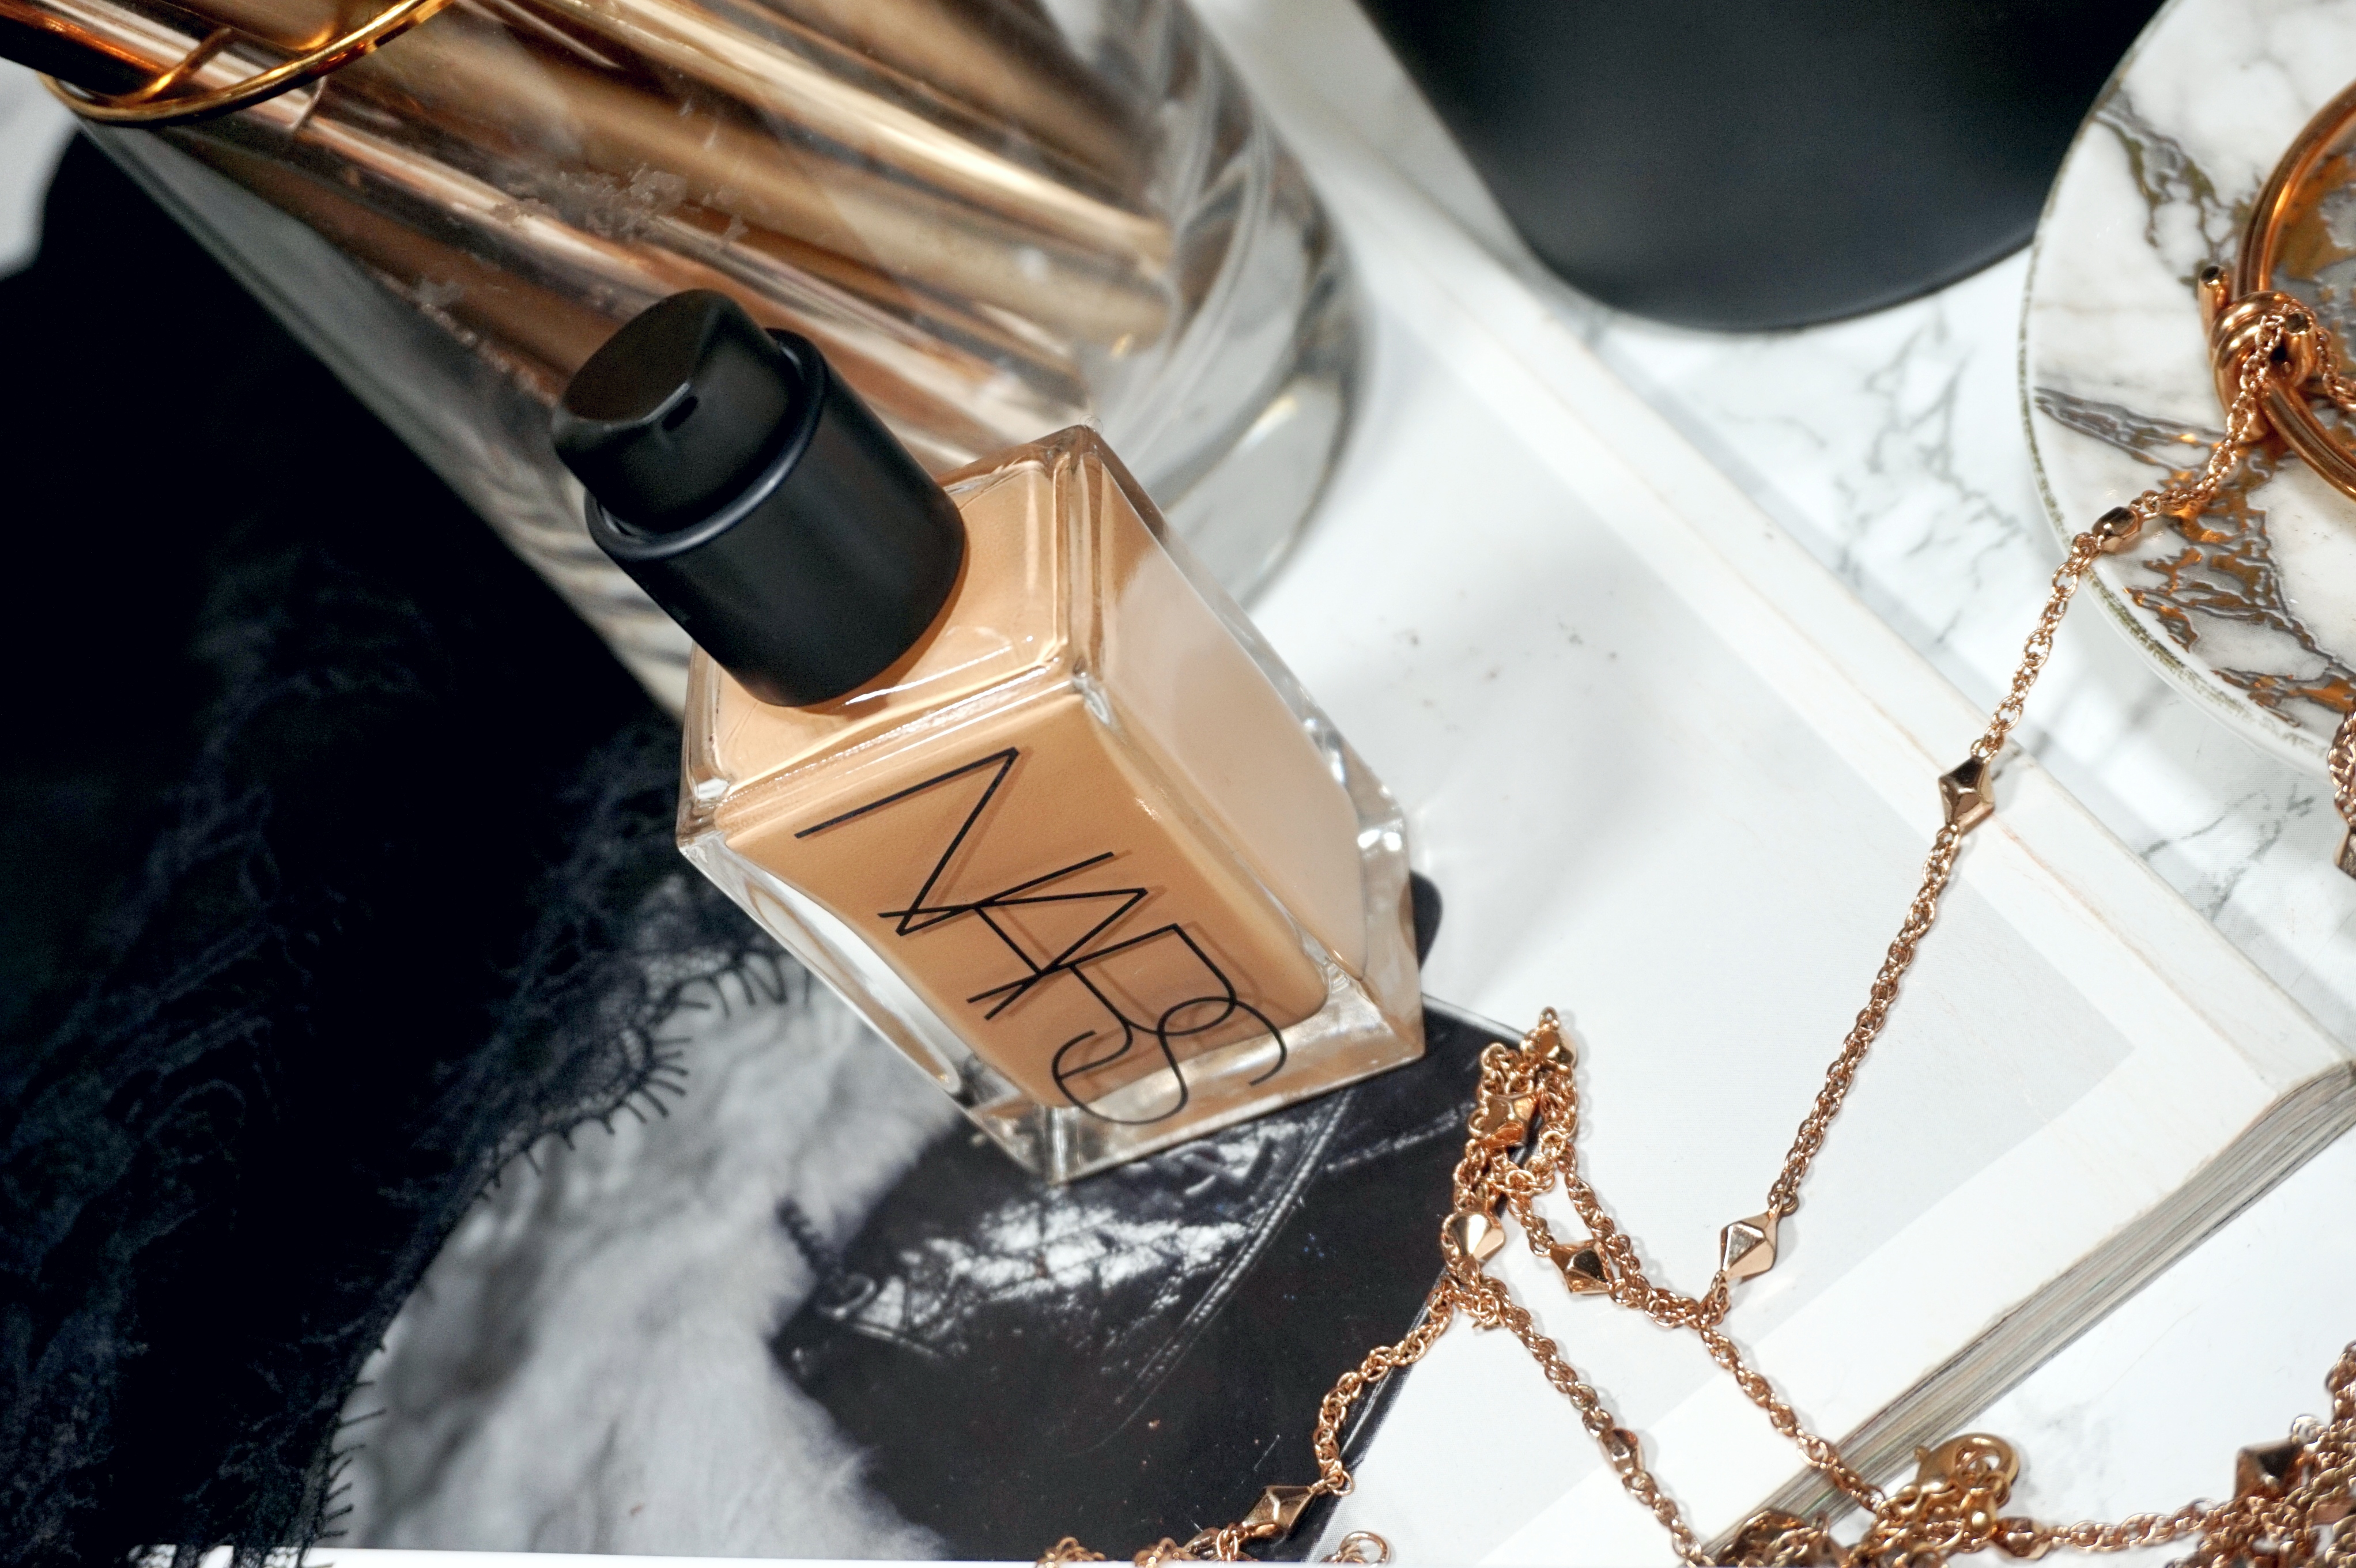 NARS Light Reflecting Advanced Skincare Foundation Review and Swatches